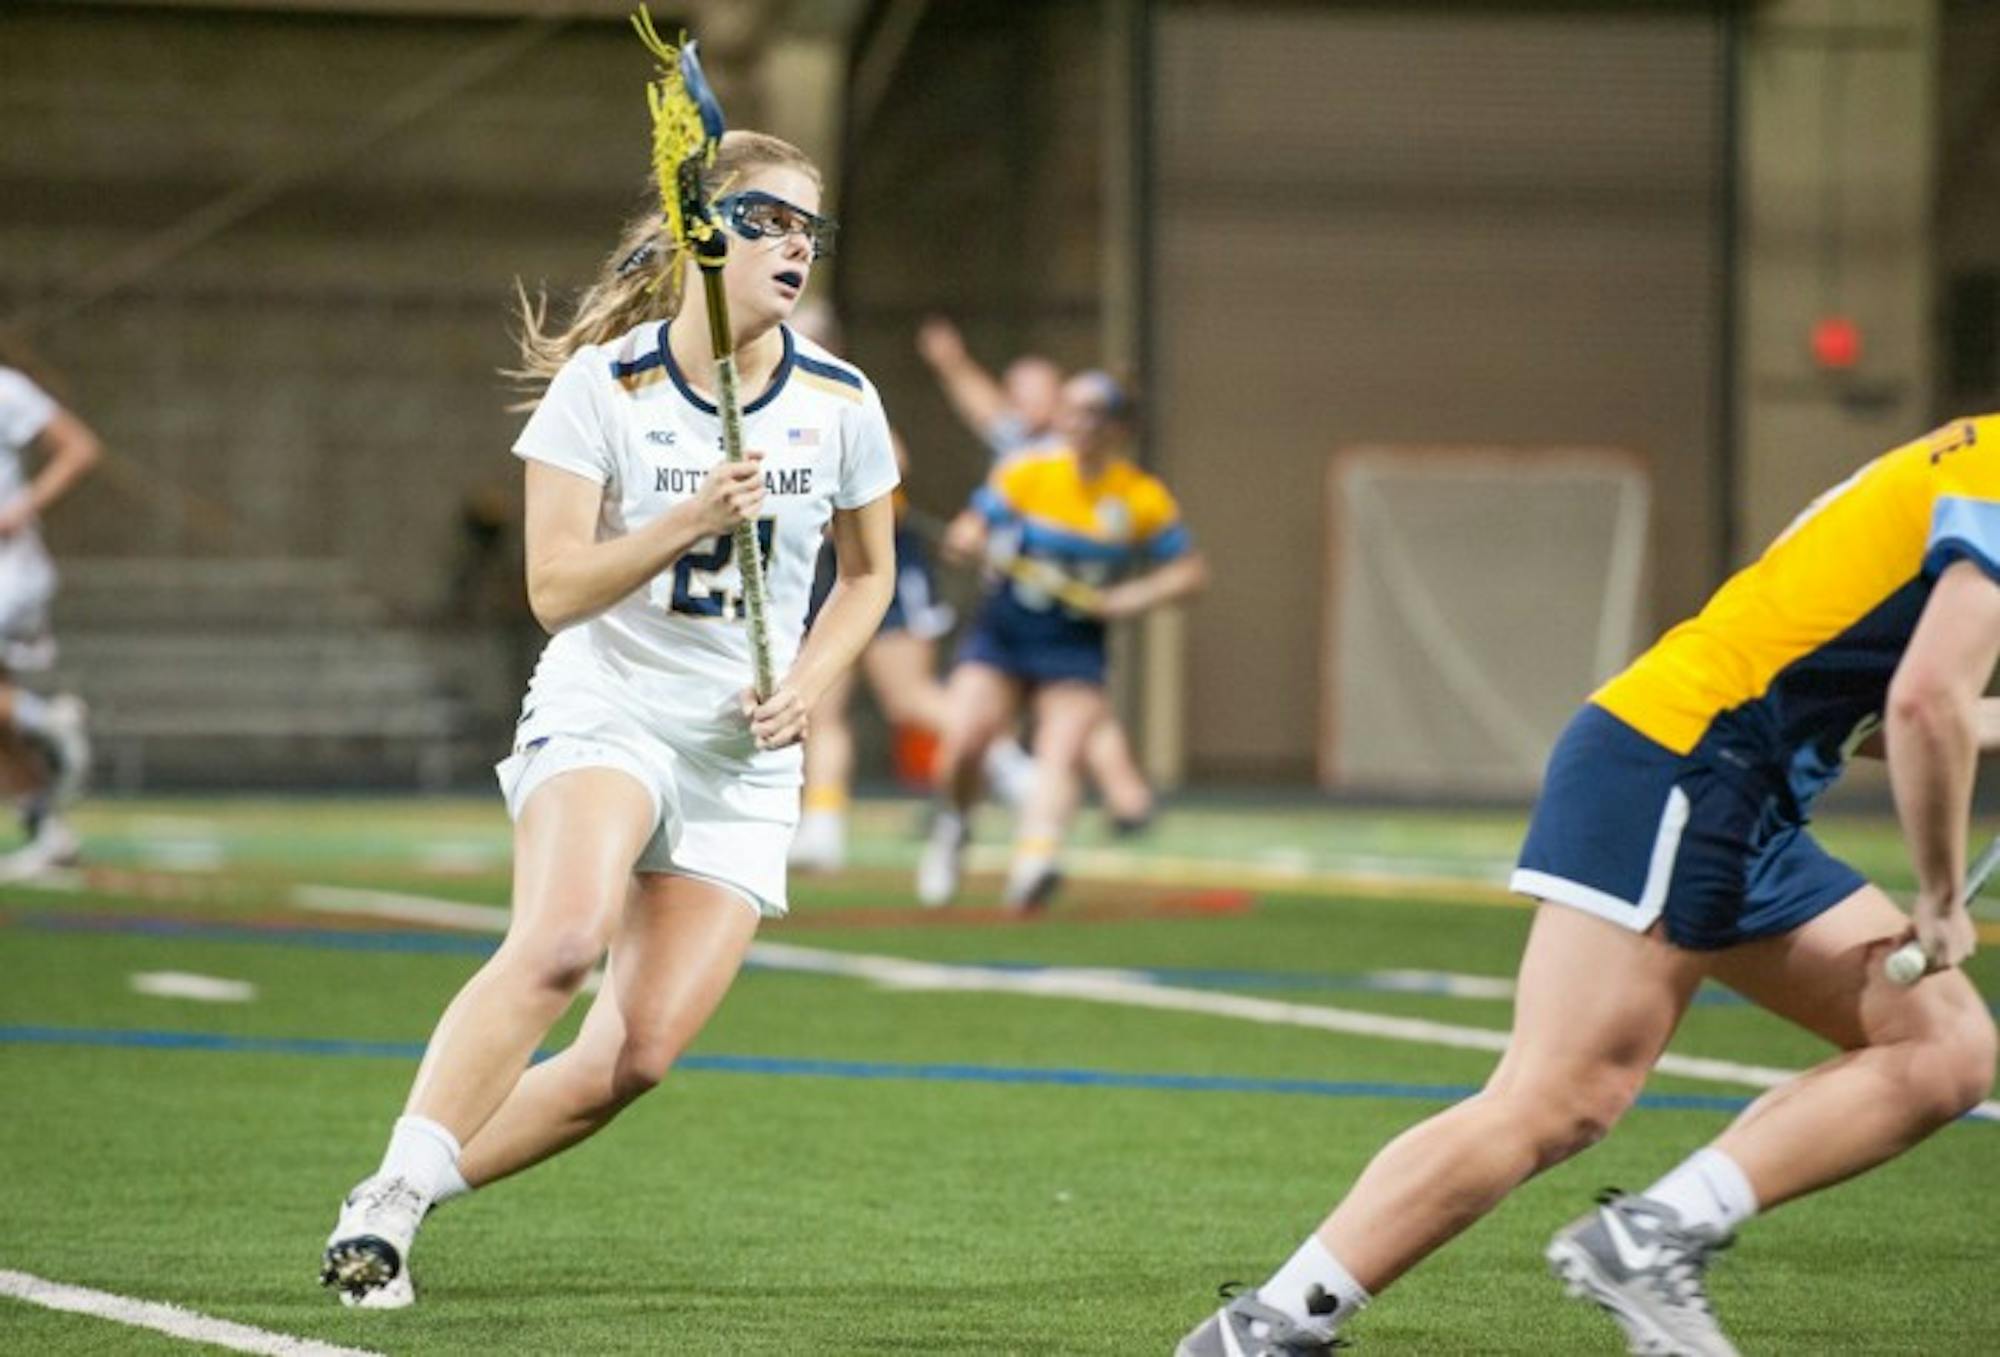 Irish senior attack Grace Muller cradles the ball during Notre Dame’s 21-9 win over Marquette on Feb. 14 at Loftus Sports Center.